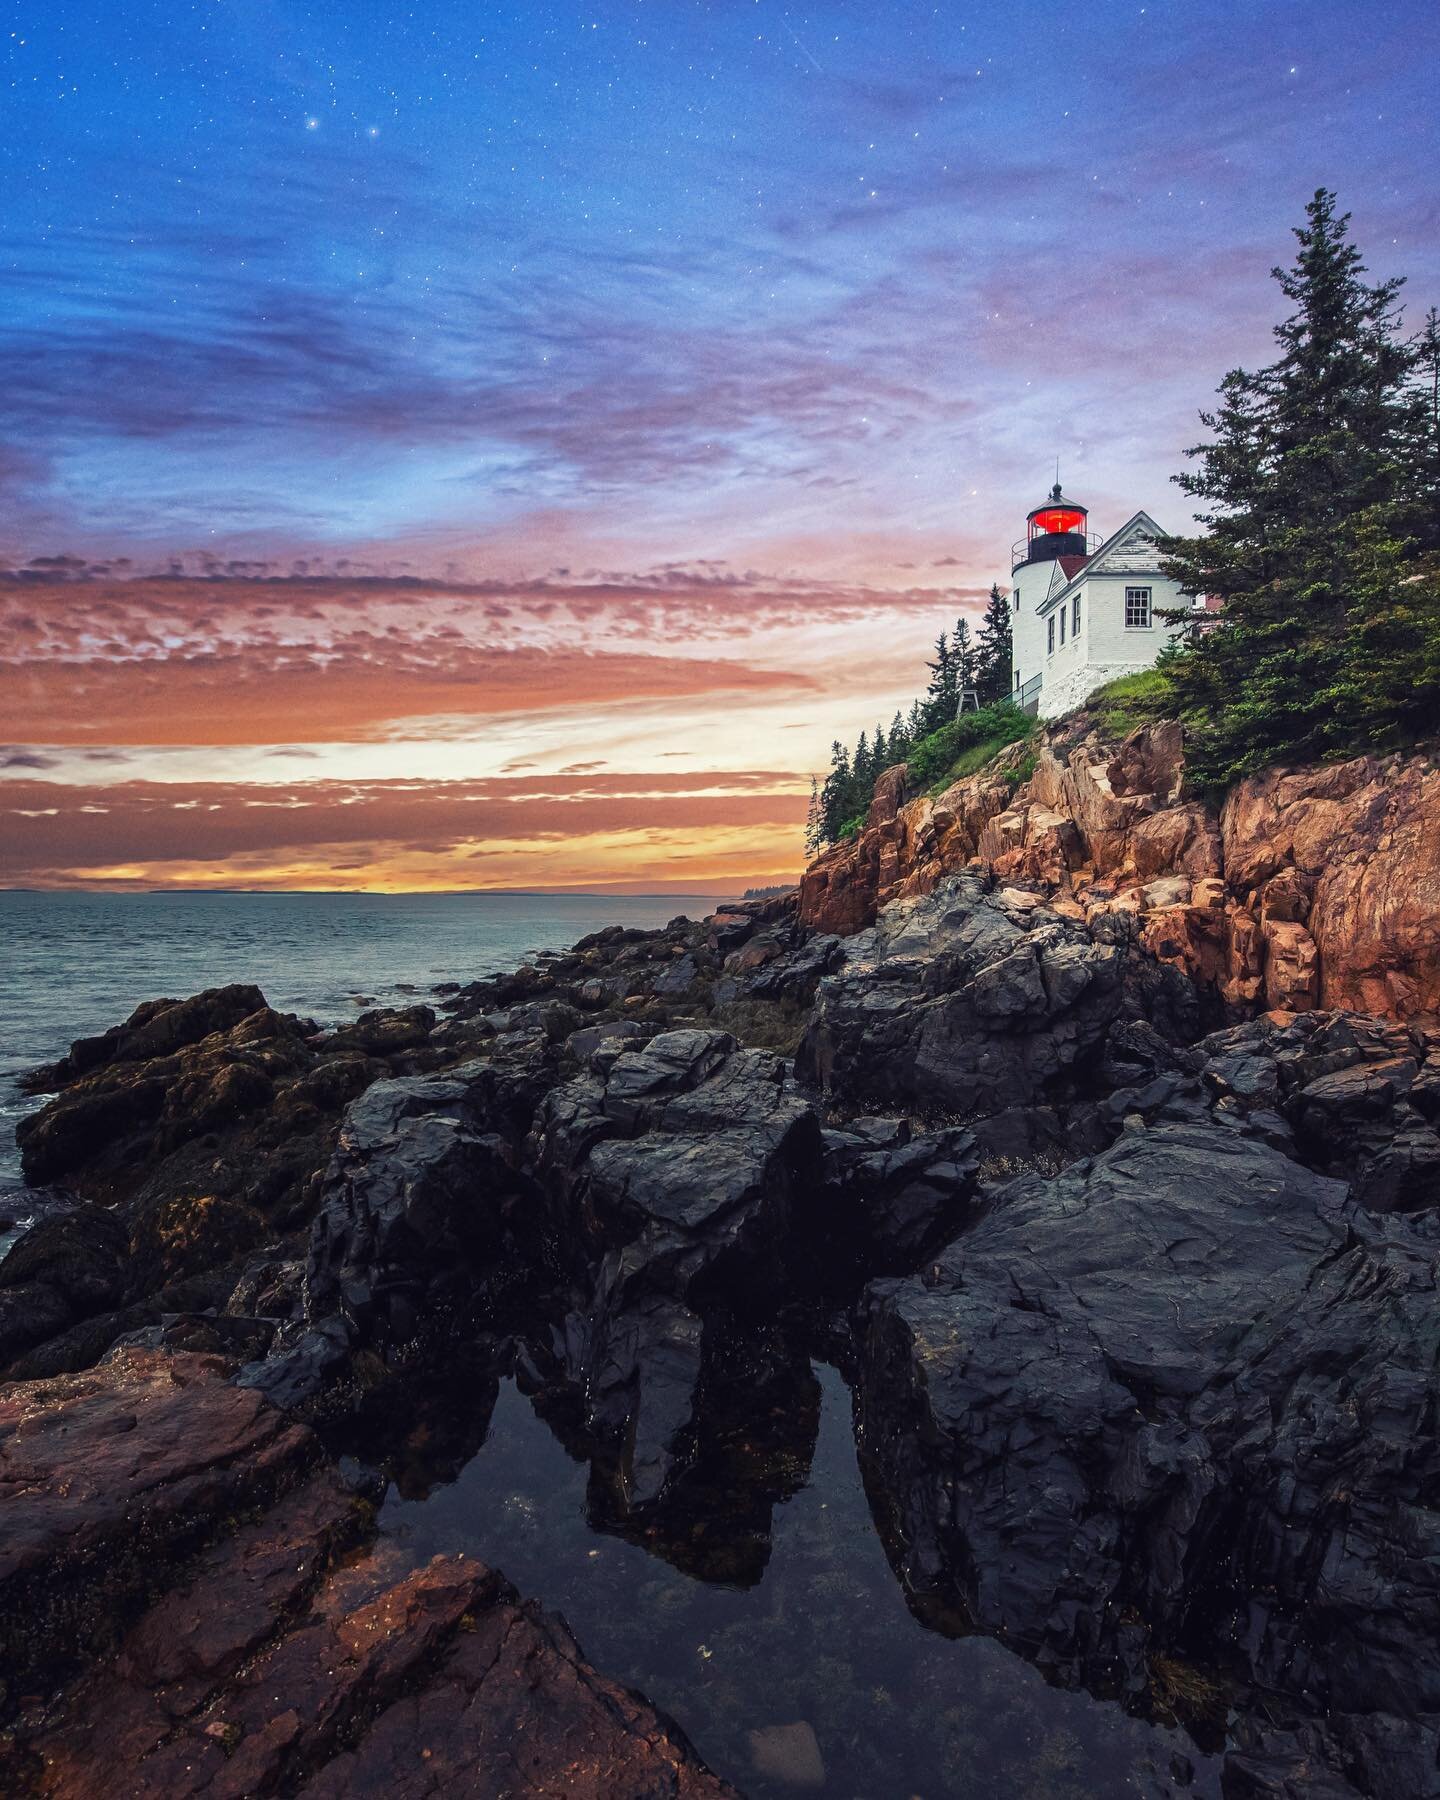 This beauty appeared on the America the Beautiful quarter in 2012! Loving the red light 😍 #acadianationalpark 

&ldquo;The Bass Harbor Head Light Station is located in Tremont, Maine, marking the entrance to Bass Harbor and Blue Hill Bay on the sout